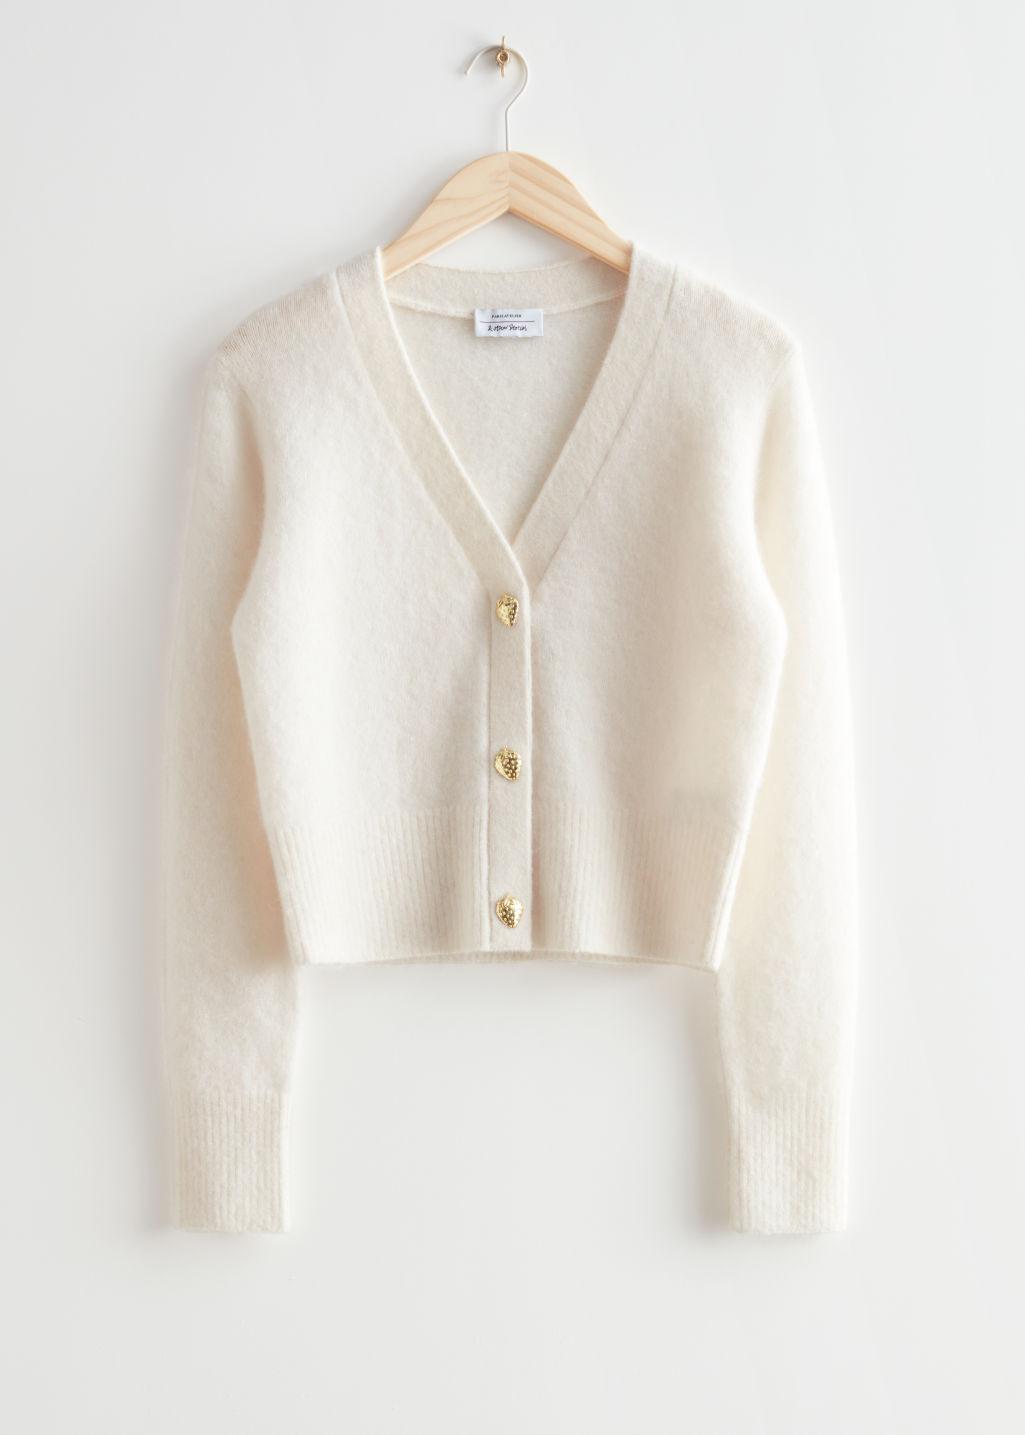 & Other Stories Gold Button Cardigan in White | Lyst